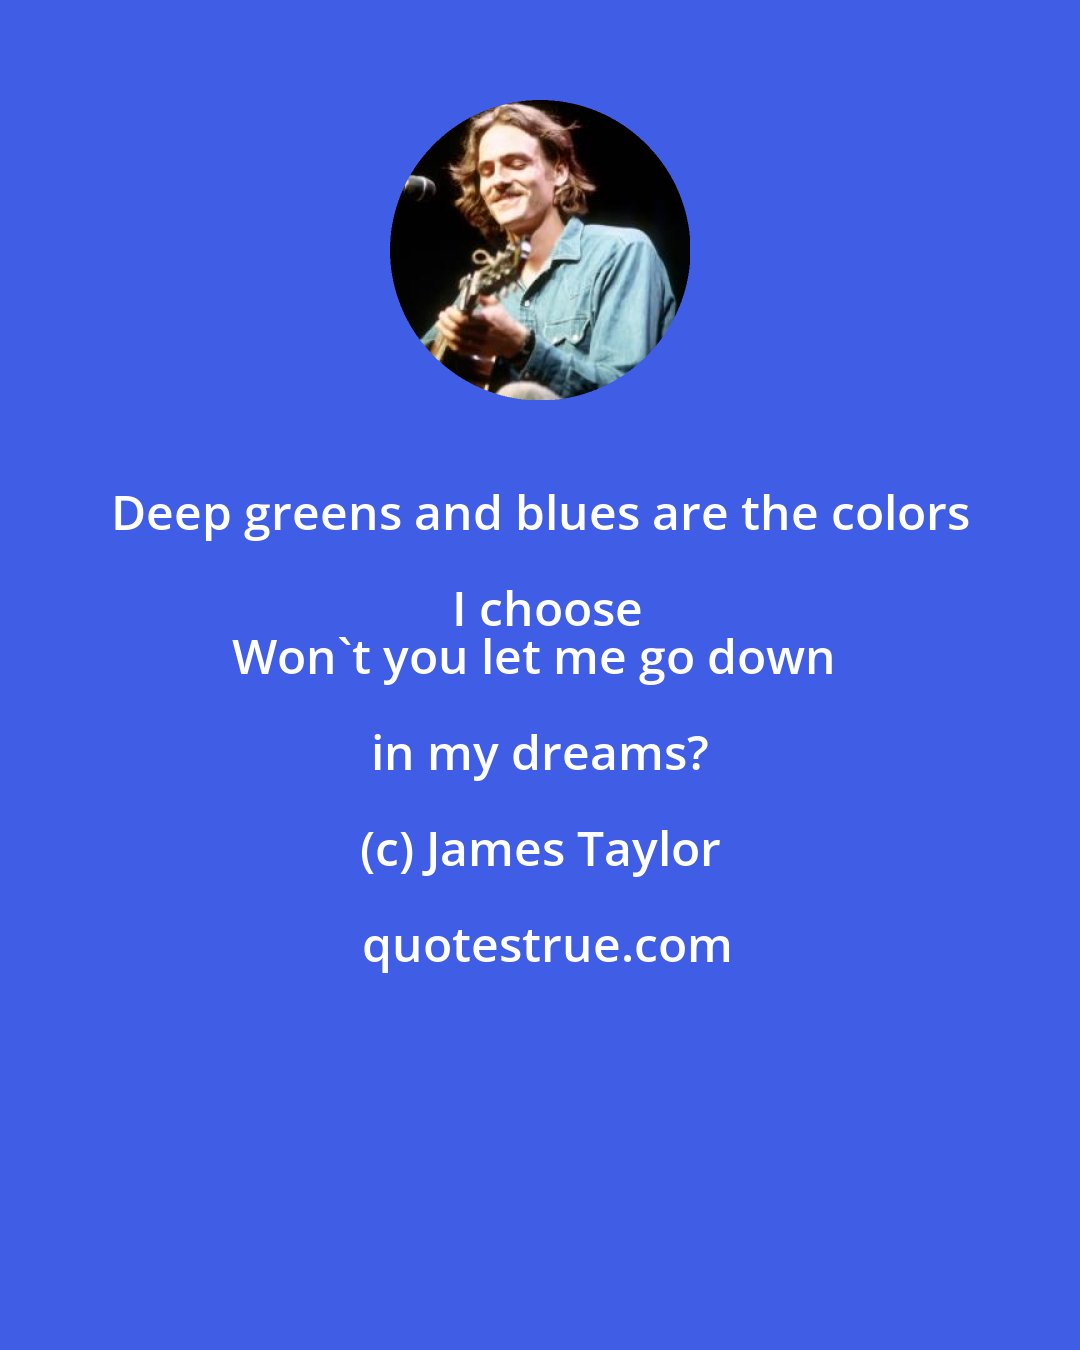 James Taylor: Deep greens and blues are the colors I choose
Won't you let me go down in my dreams?